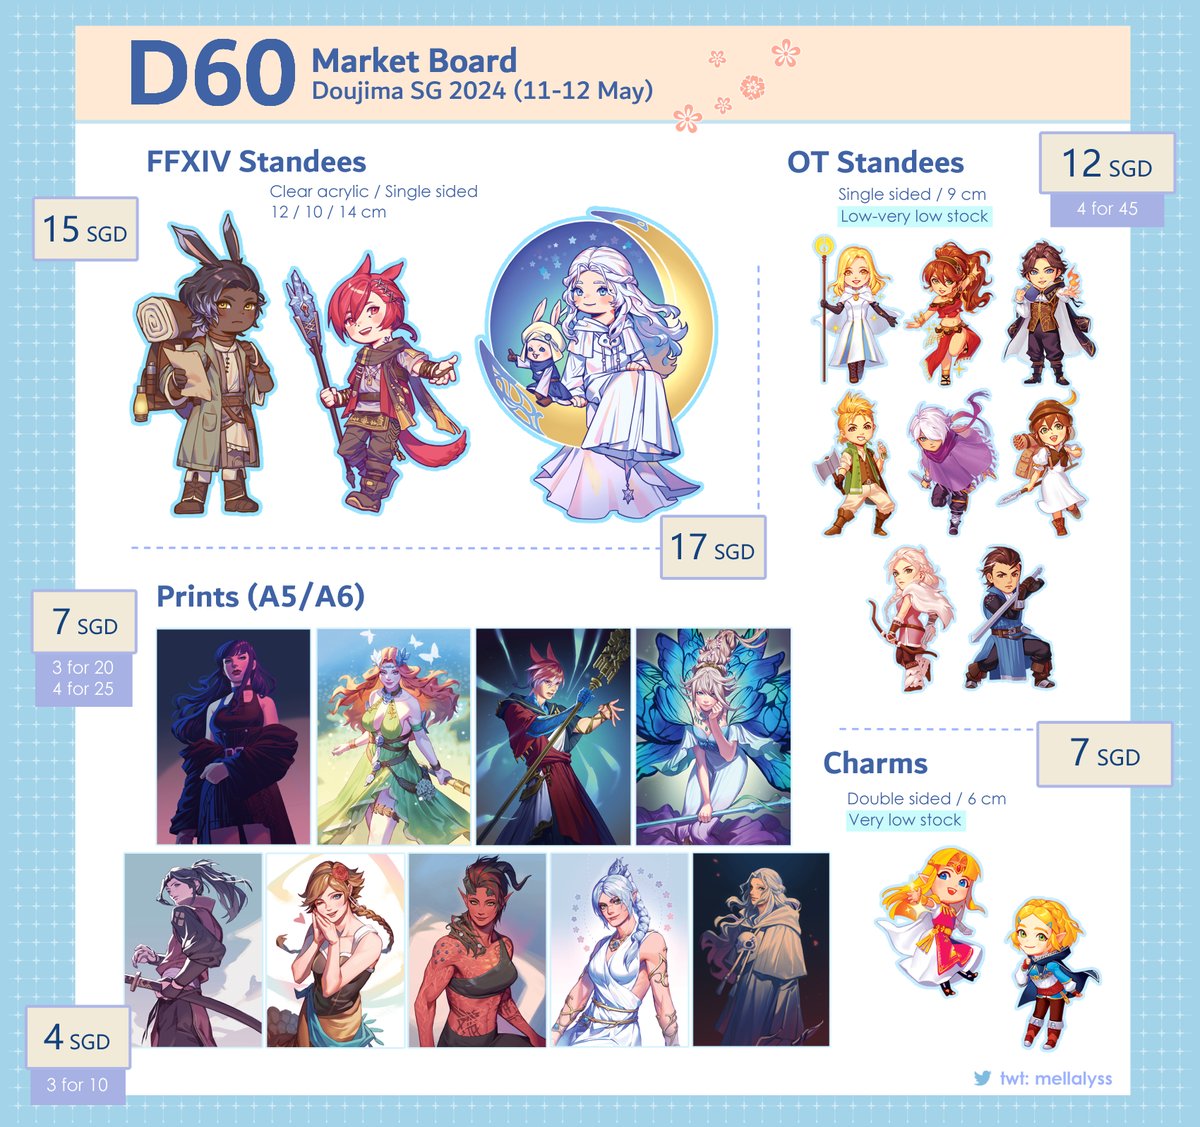 ( 💖RTs appreciated! ) My catalogue for #doujima2024 ✨ I'll be at D60, Market Board! See you there!